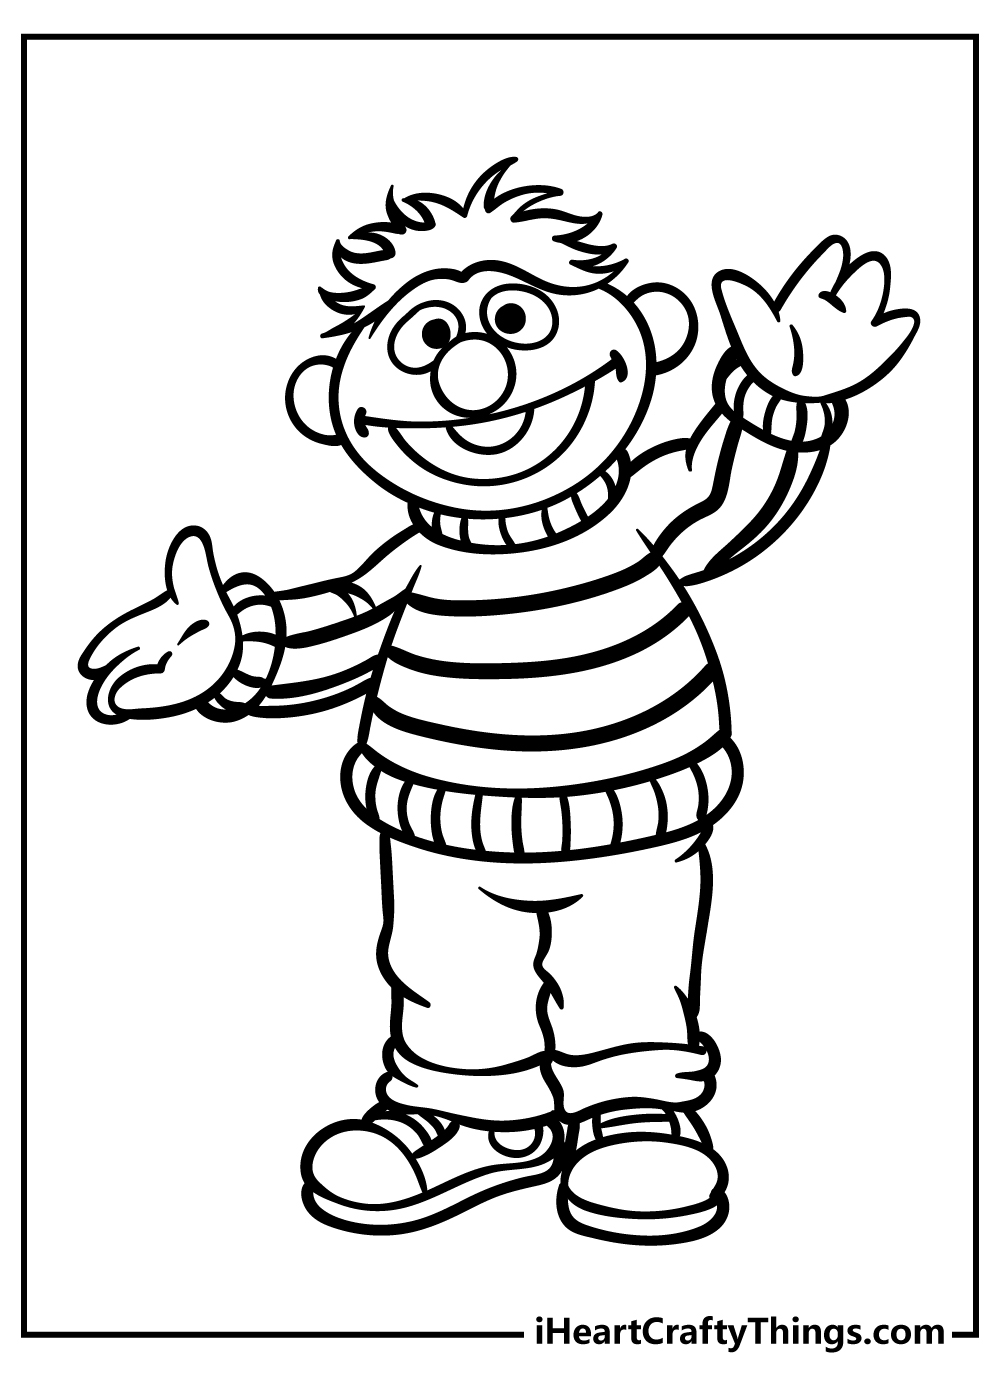 Sesame Street Coloring Book for adults free download